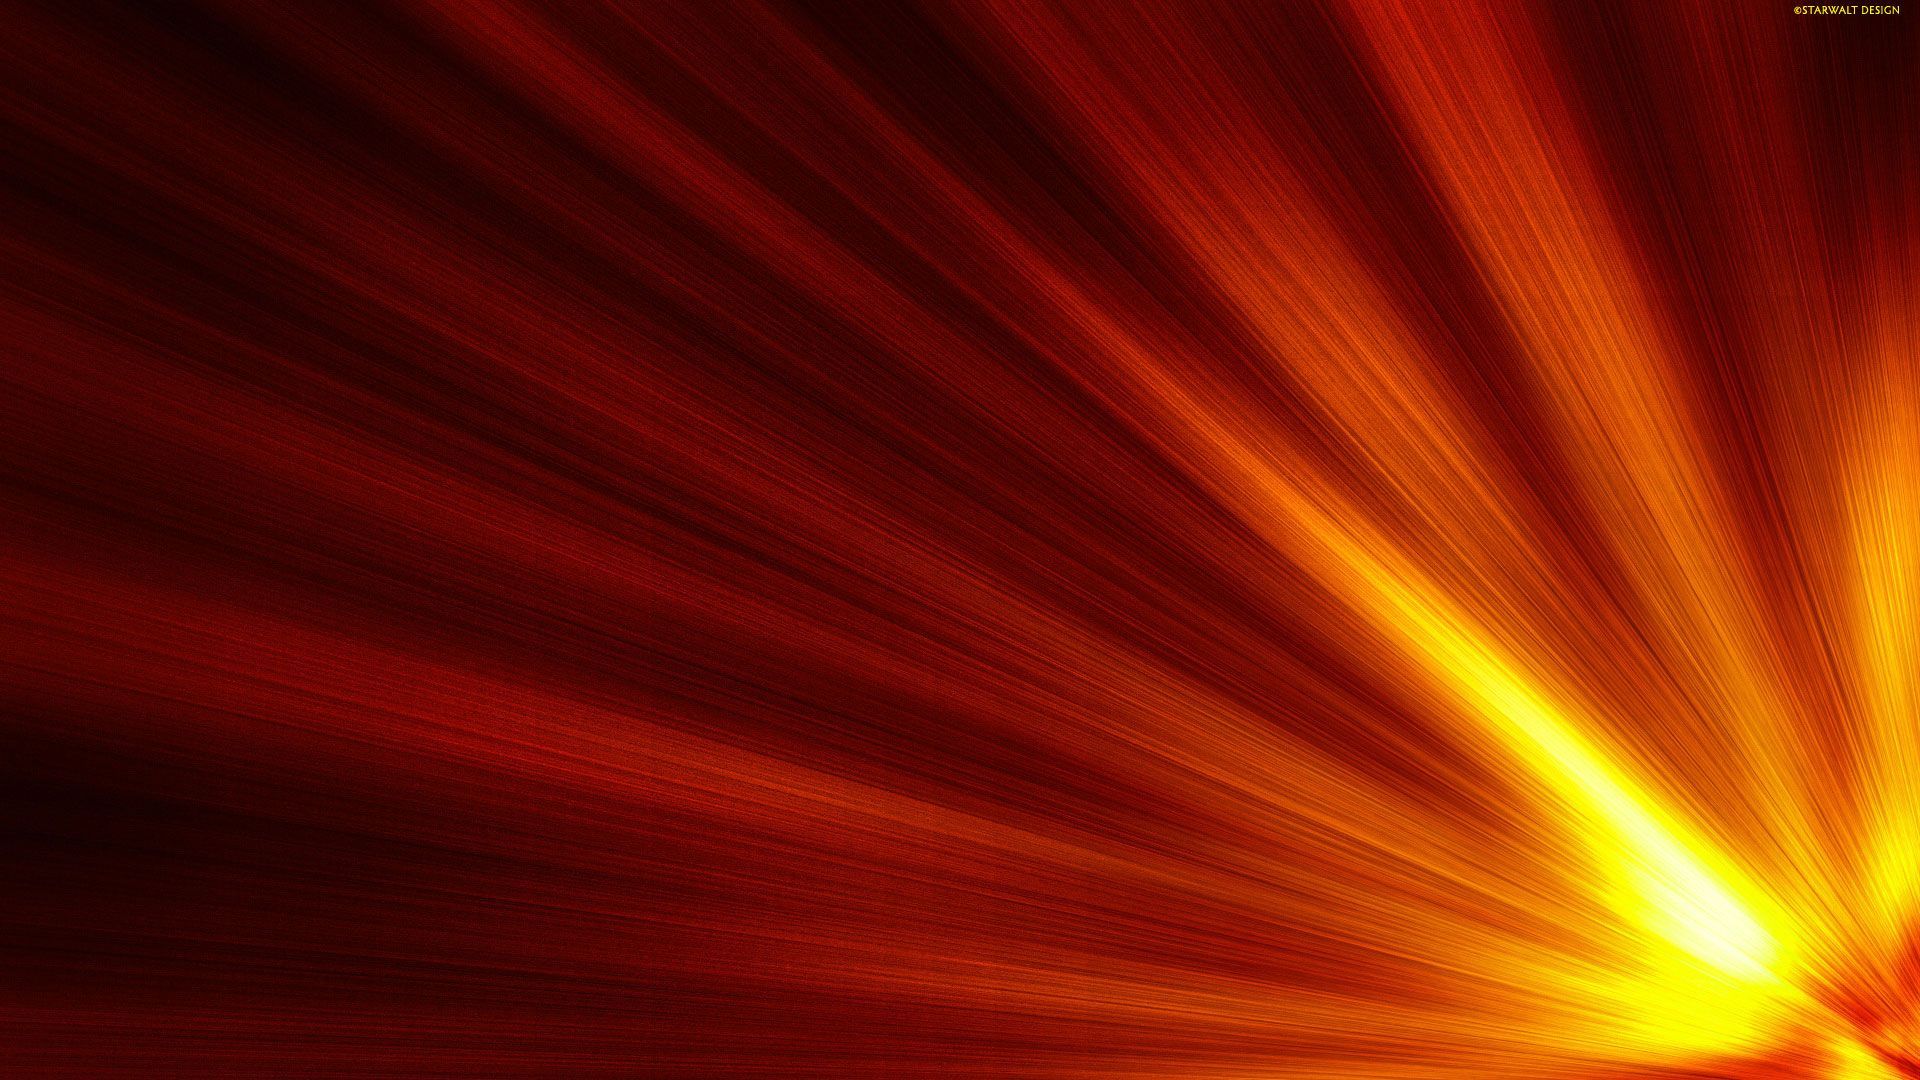 3D Wallpapers | Abstract Desktop Backgrounds | HD Wallpapers - Page 11